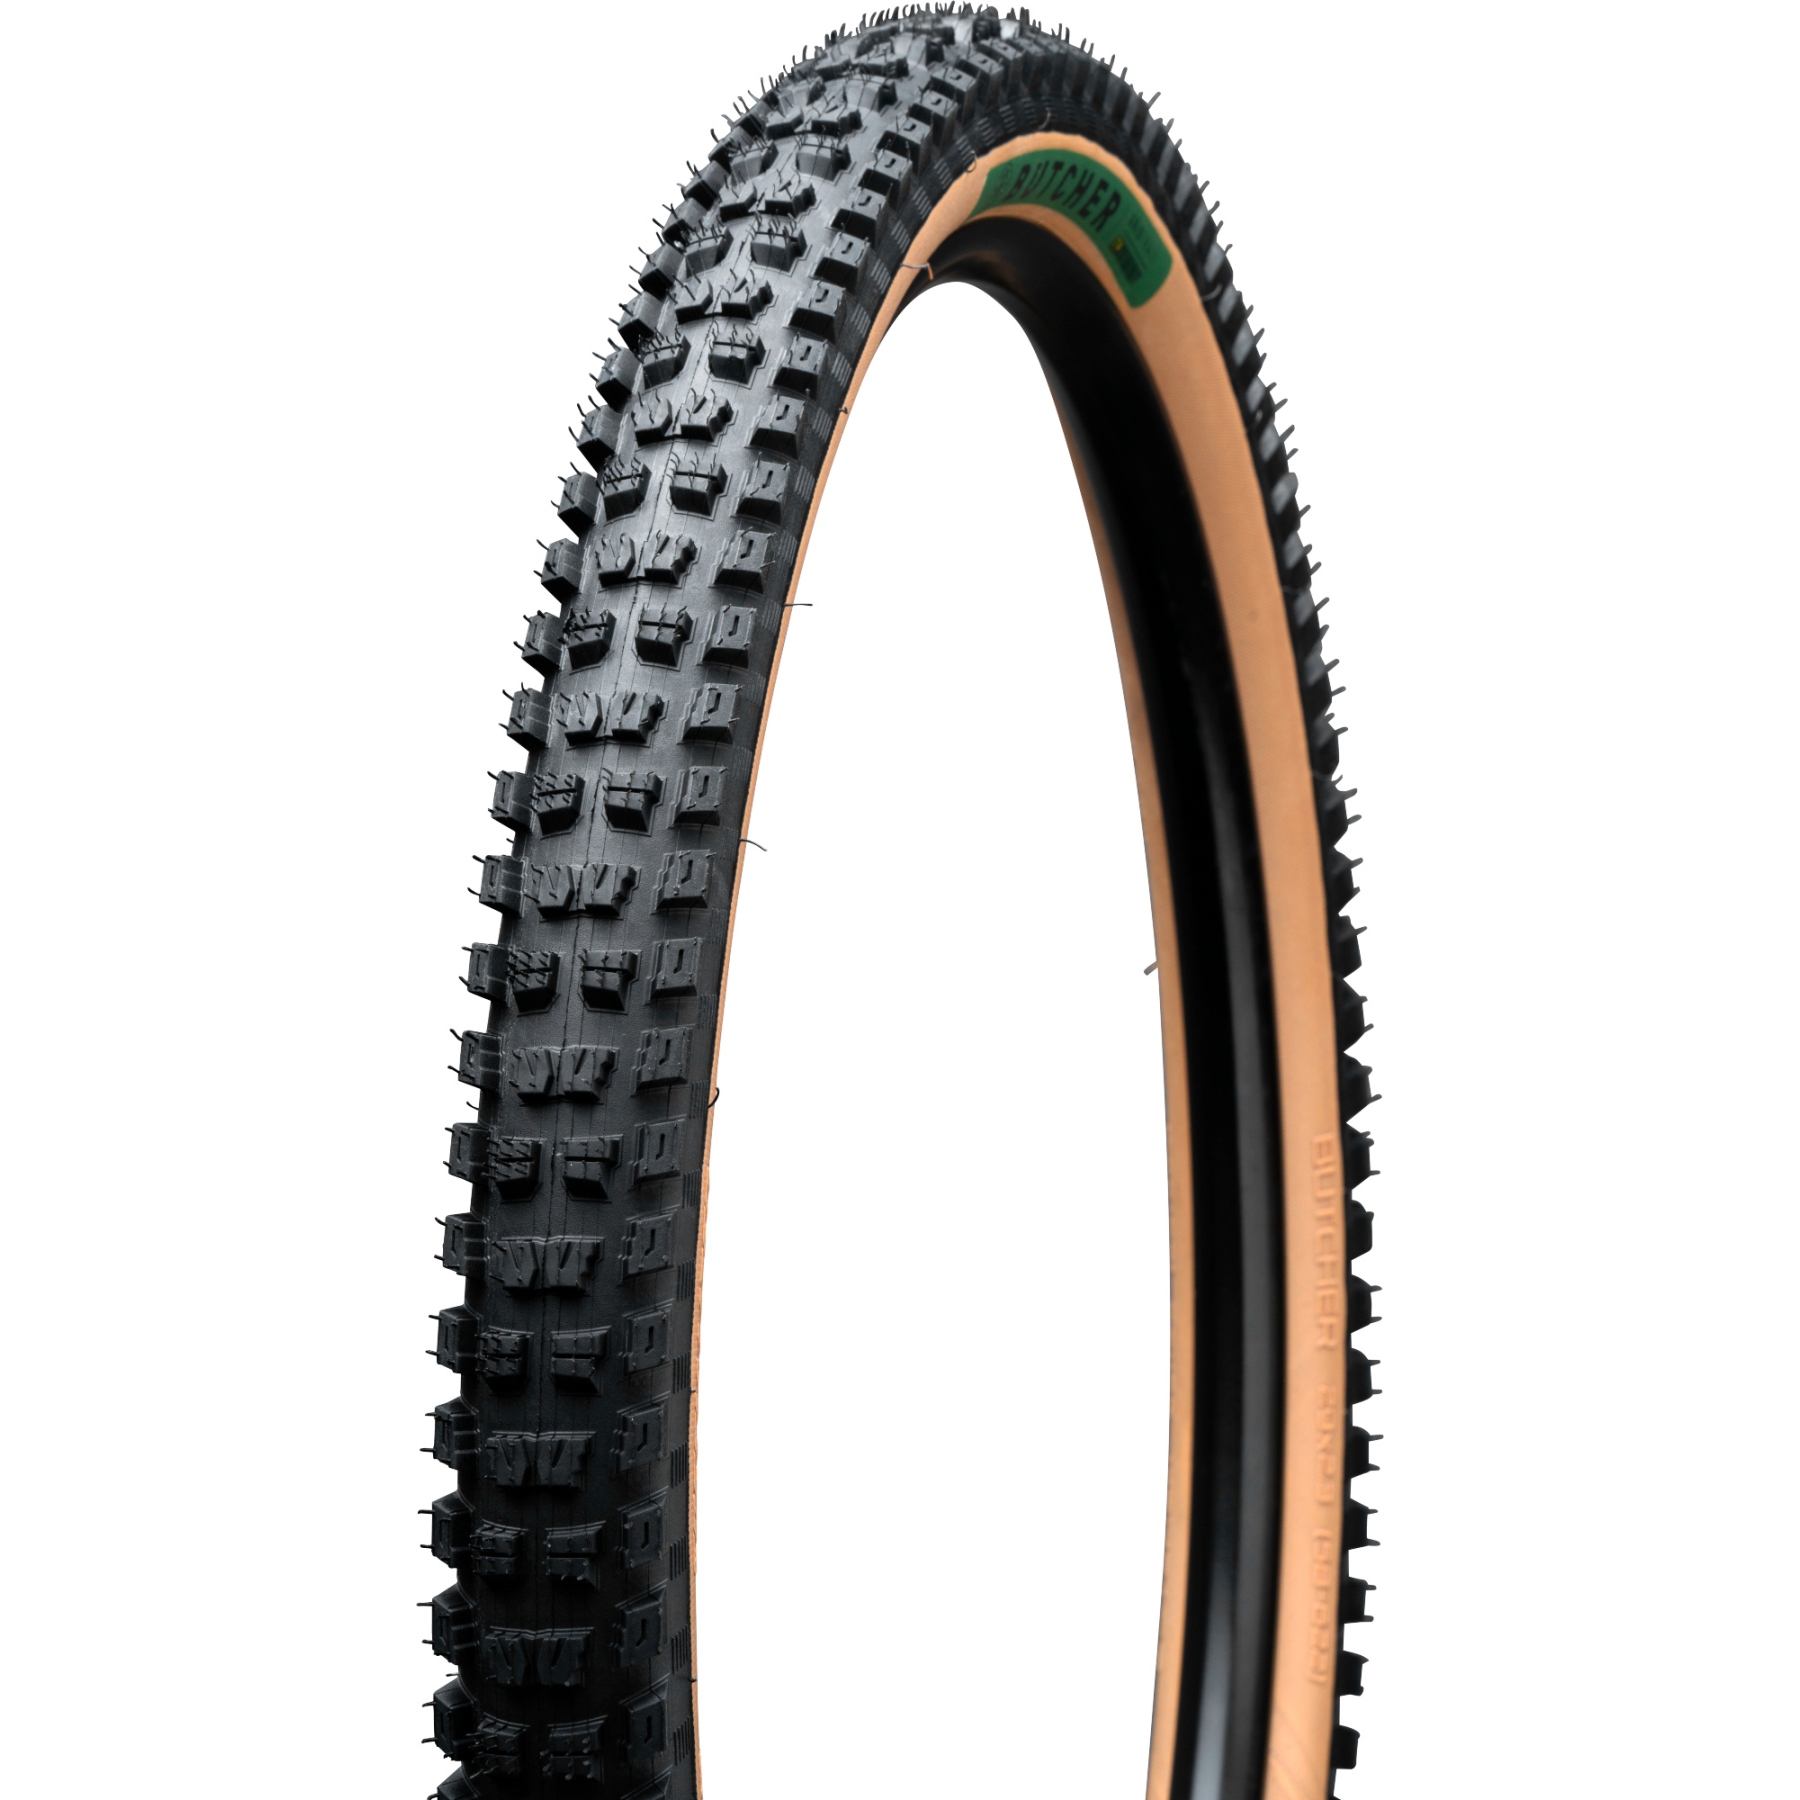 Picture of Specialized Butcher GRID Trail 2Bliss Ready T9 MTB Folding Tire 27.5x2.60 Inch - Soil Searching/Tan Sidewall